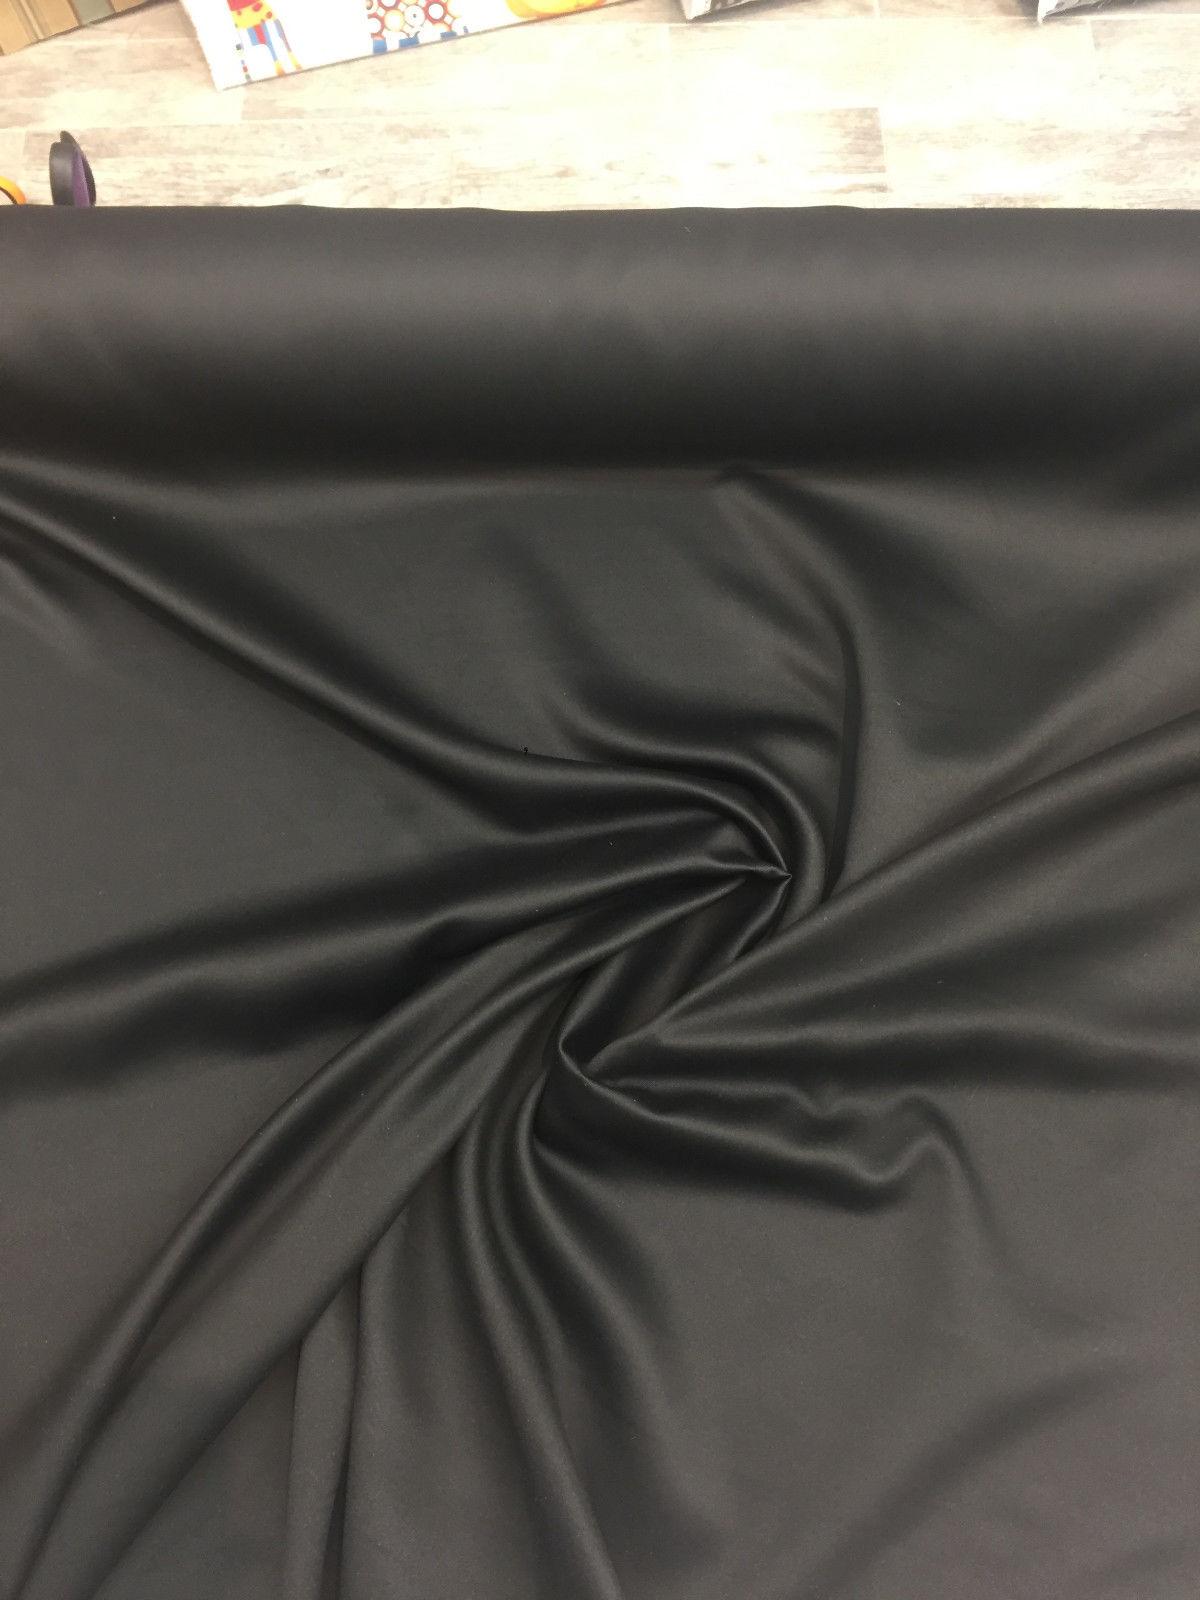 black out fabric